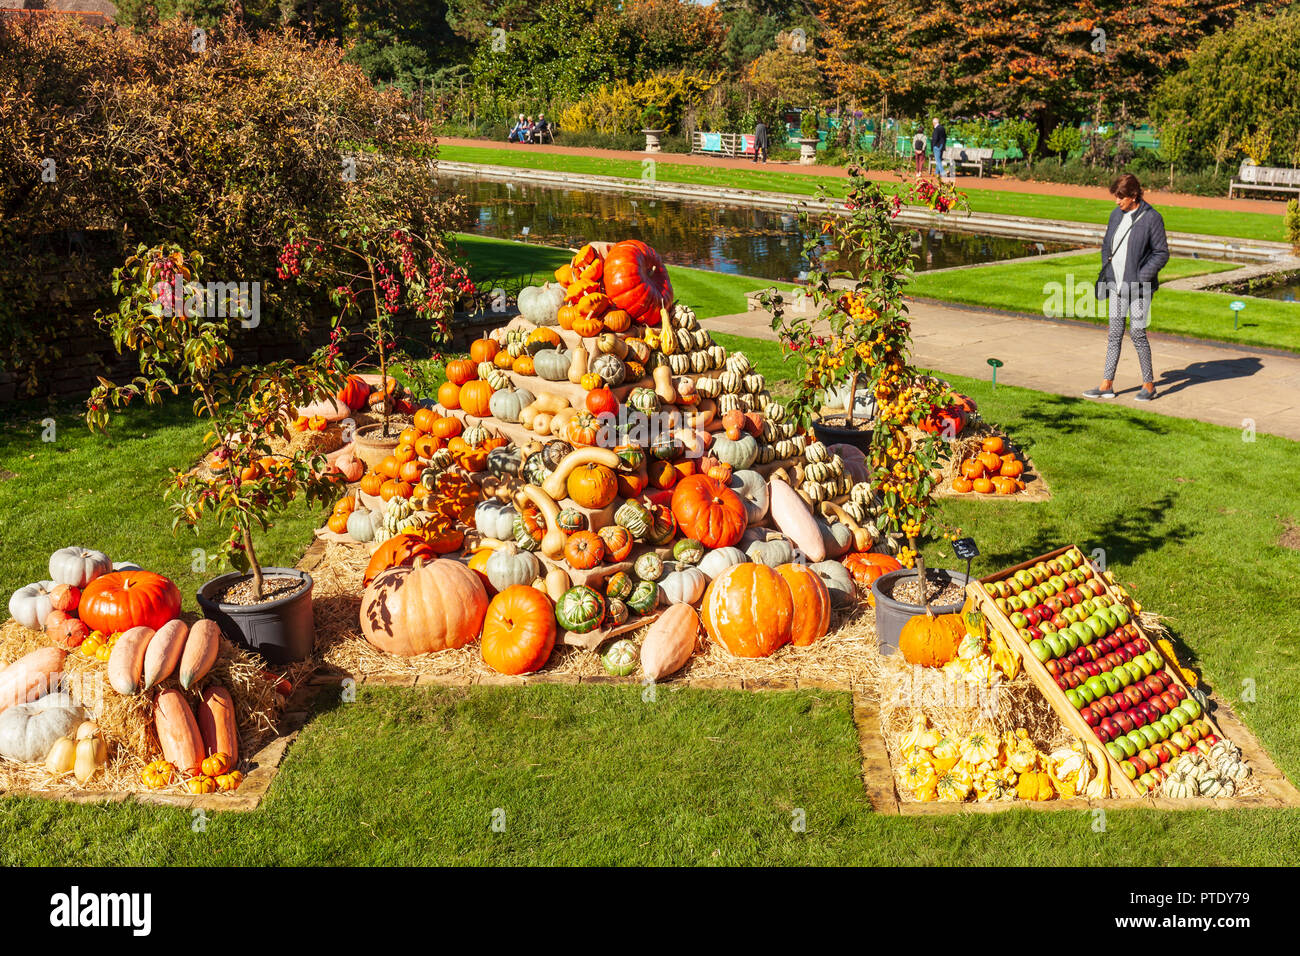 RHS Wisley Gardens, Surrey, England, UK. 9th October 2018. Wisley puts on a magnificent harvest display of Pumpkins and Squashes, in glorious warm sunshine. Credit: Tony Watson/Alamy Live News Stock Photo